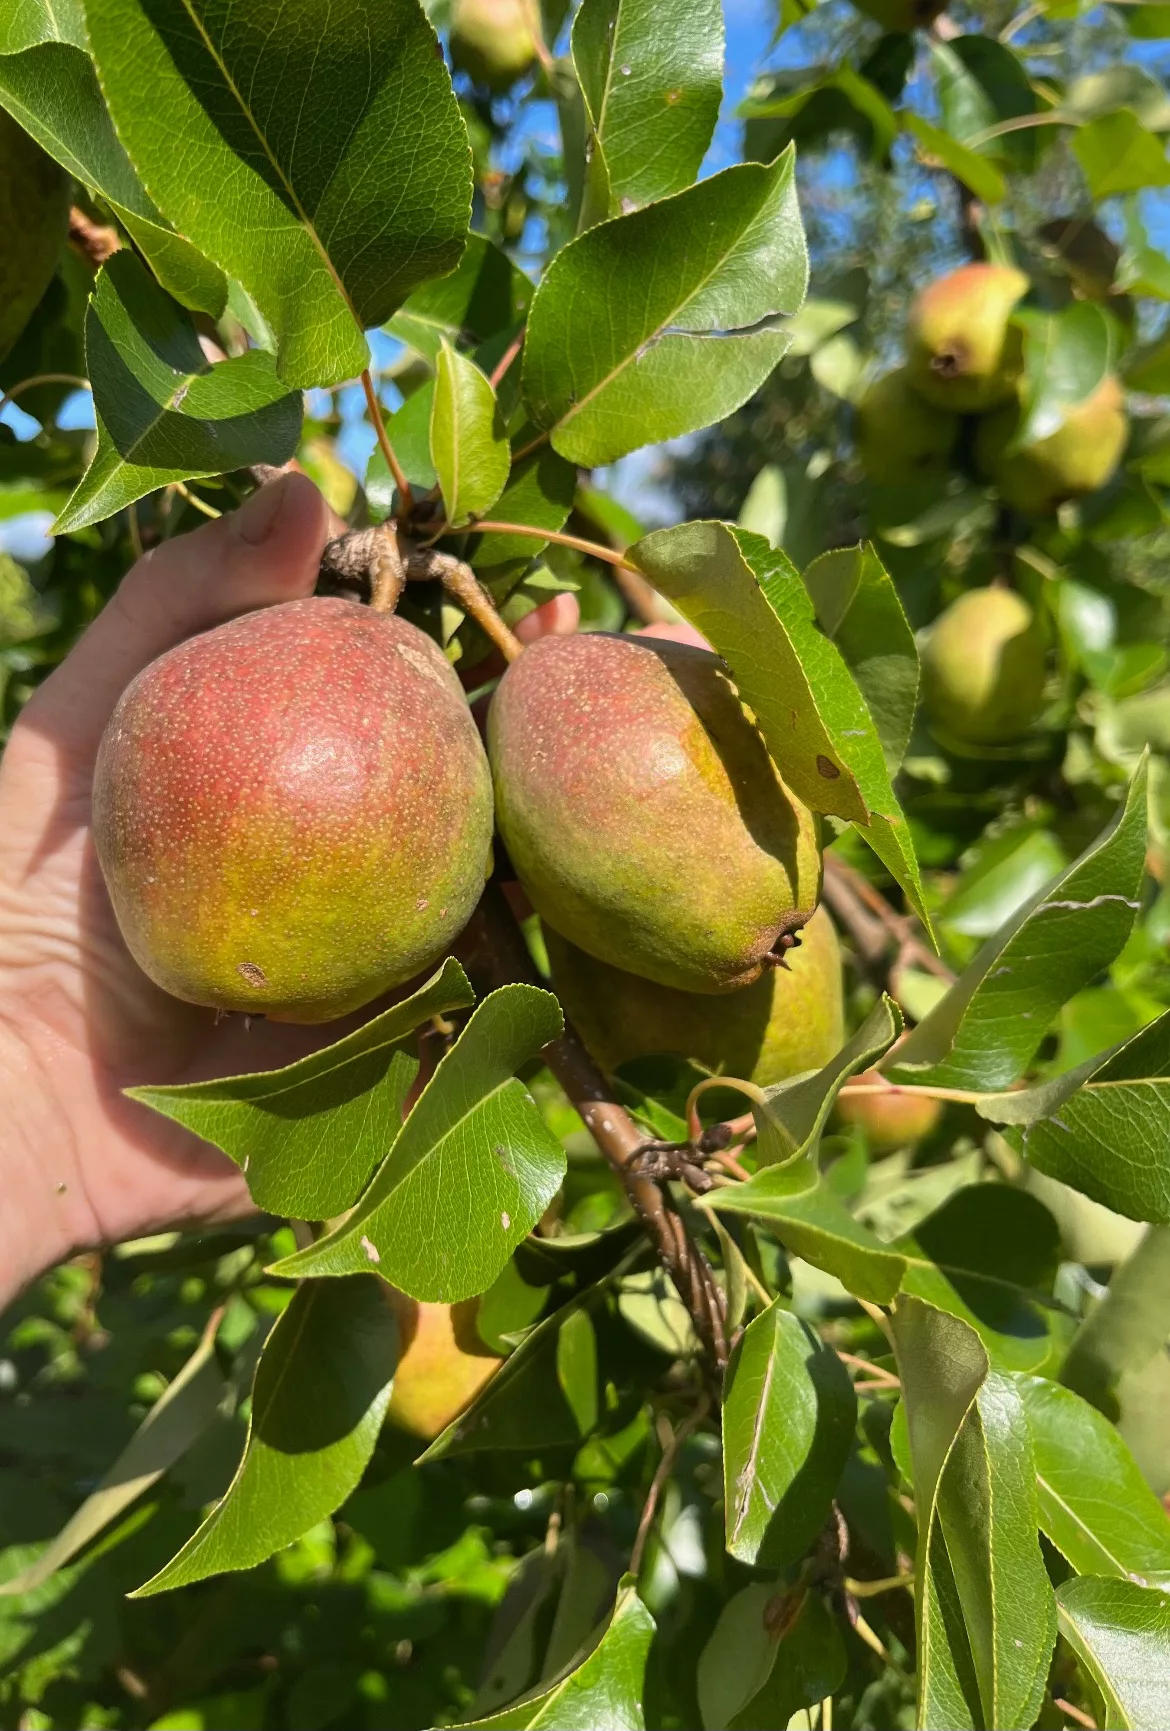 Comice Pear Tree for Sale - Buying & Growing Guide 